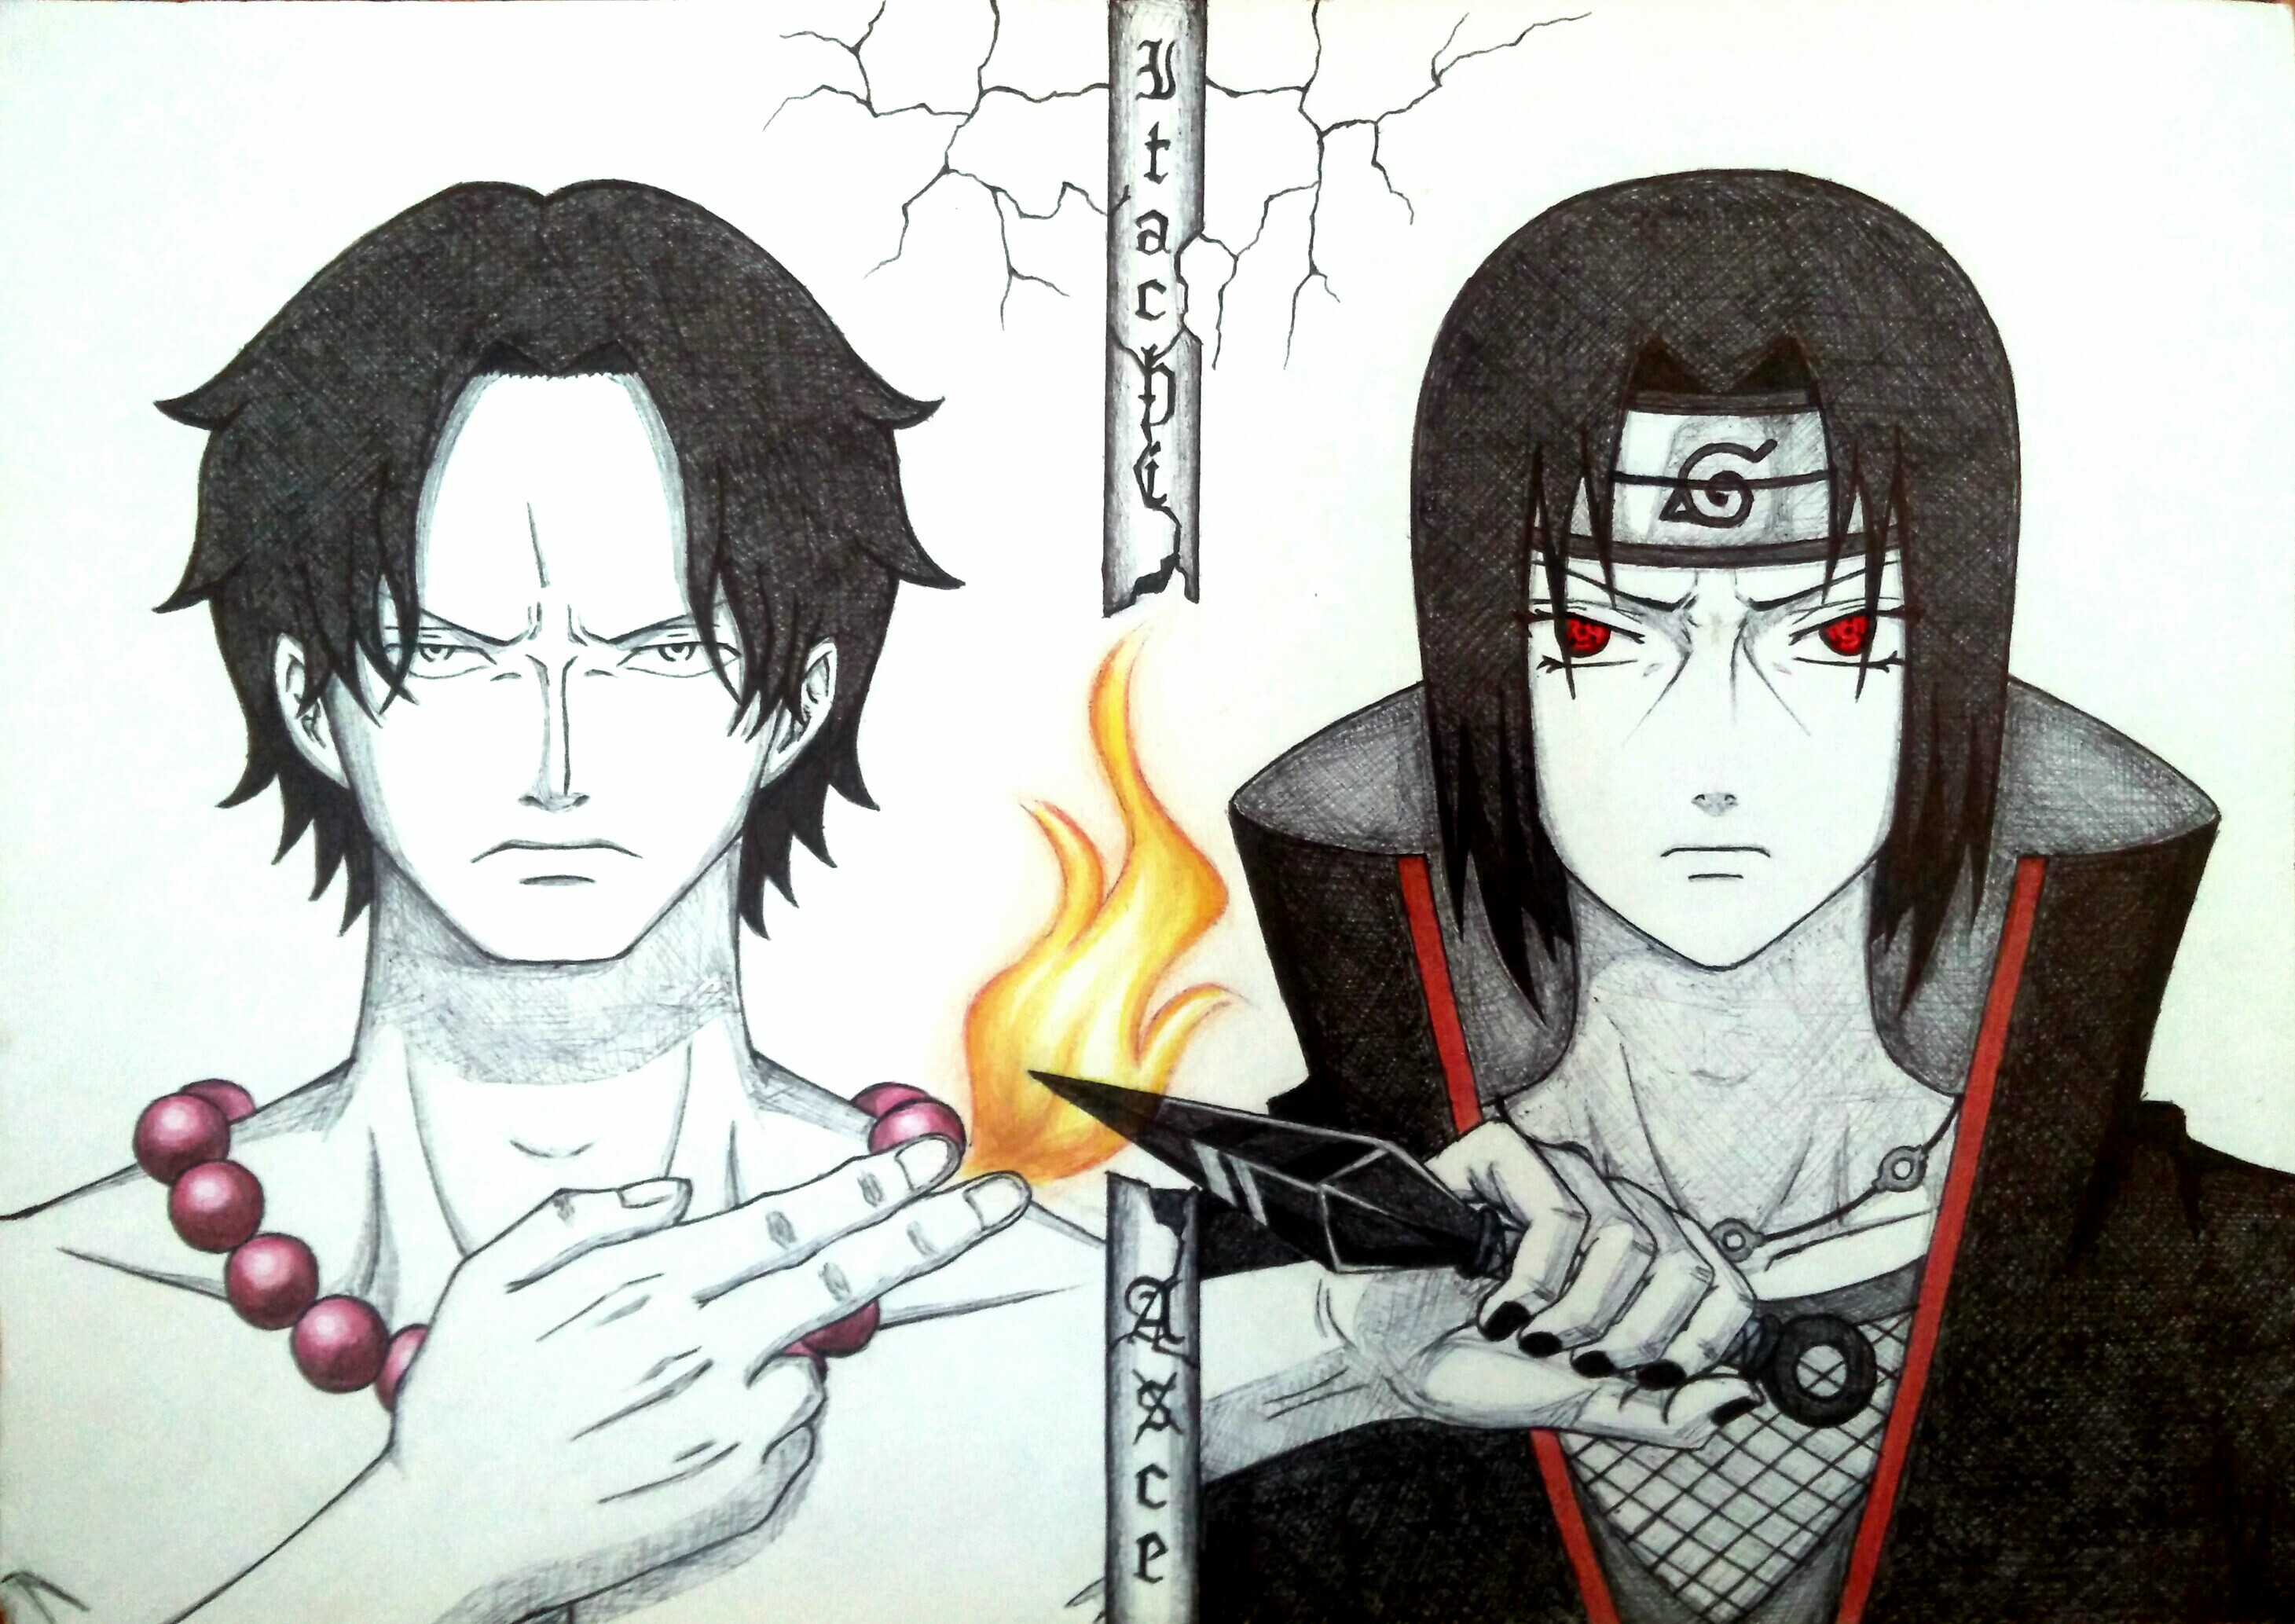 ace_and_itachi_by_dreamspainter-daevdt5